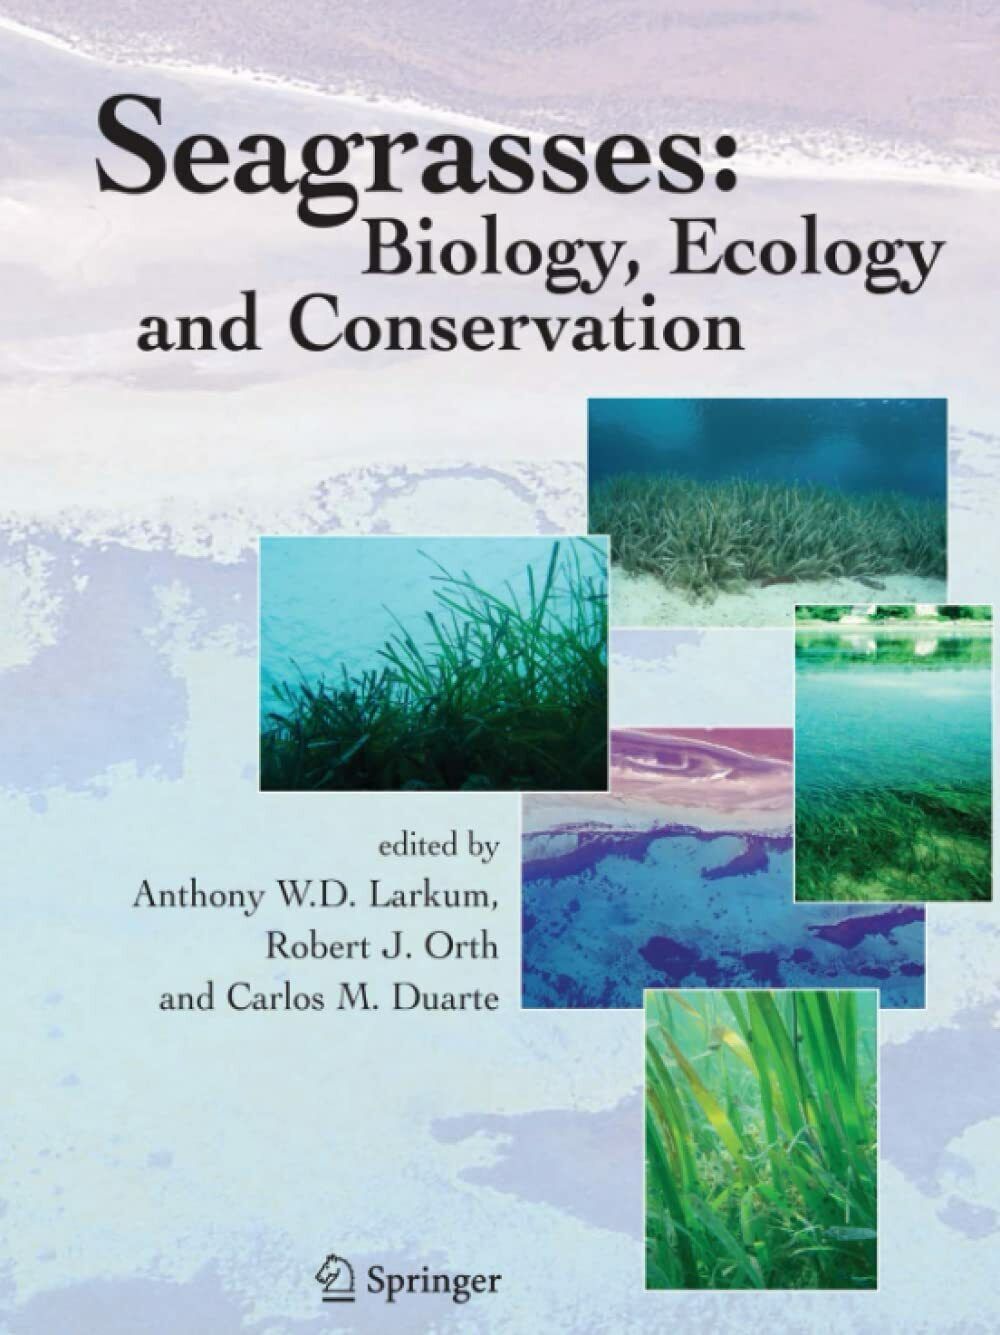 Seagrasses: Biology, Ecology and Conservation - Anthony W. D. Larkum - 2011